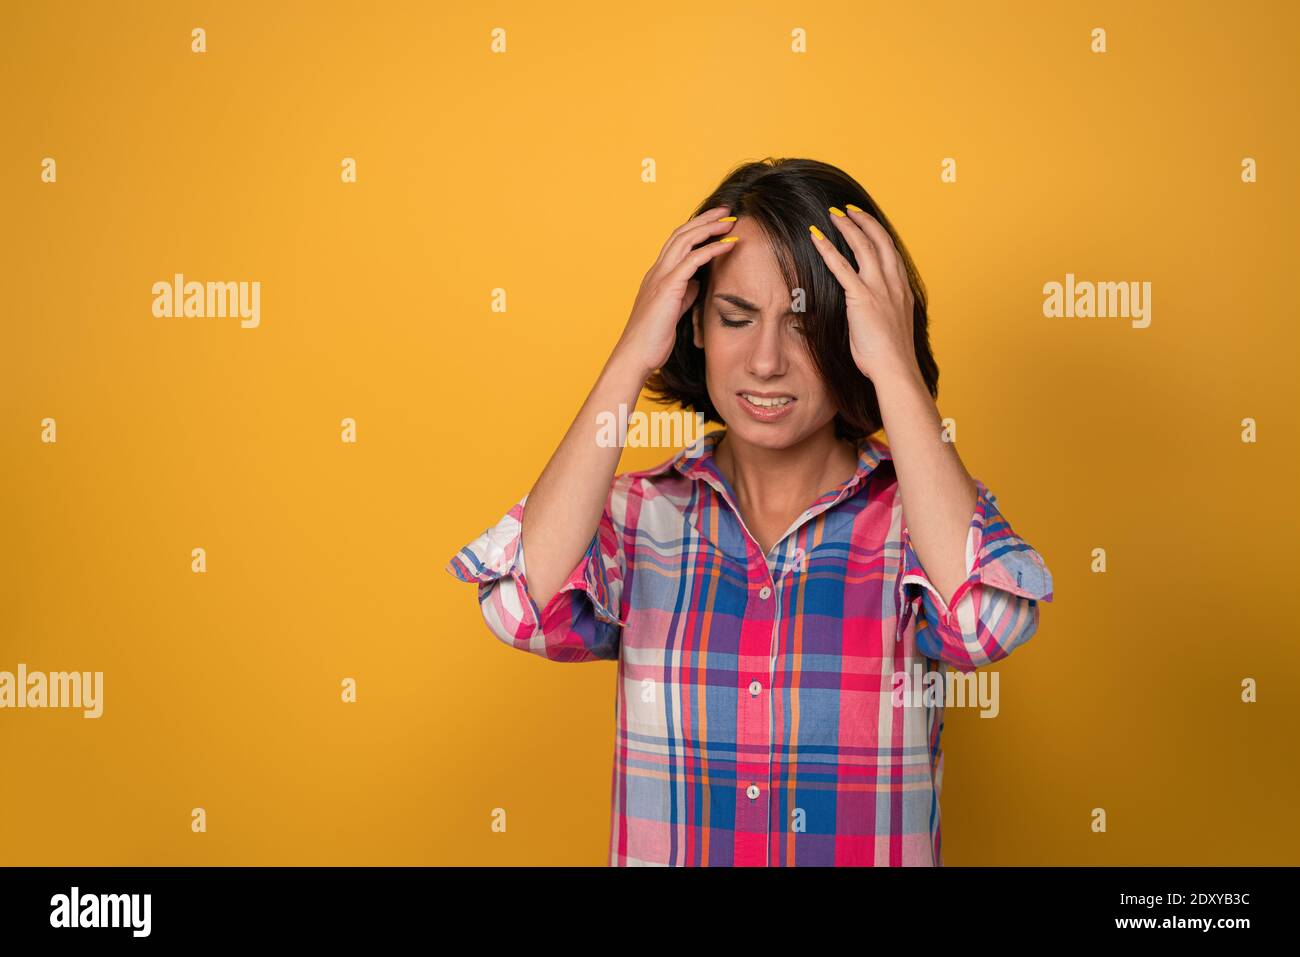 Having a headache pretty young girl holding a head with two hands and grimace of pain on the face wearing plaid shirt isolated on yellow background Stock Photo